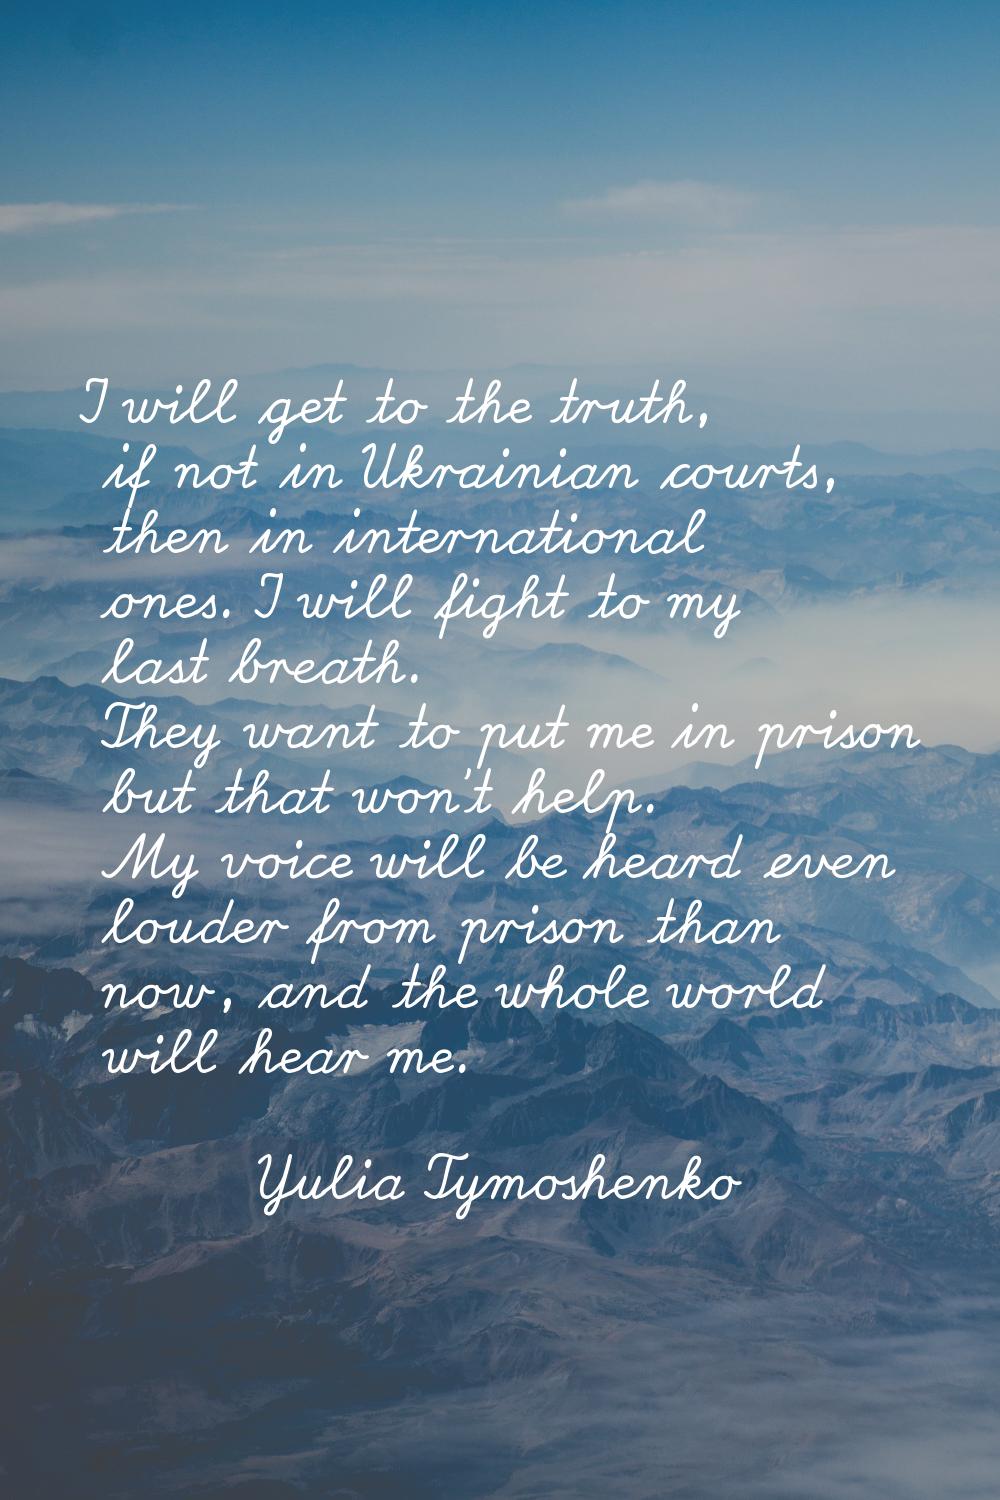 I will get to the truth, if not in Ukrainian courts, then in international ones. I will fight to my